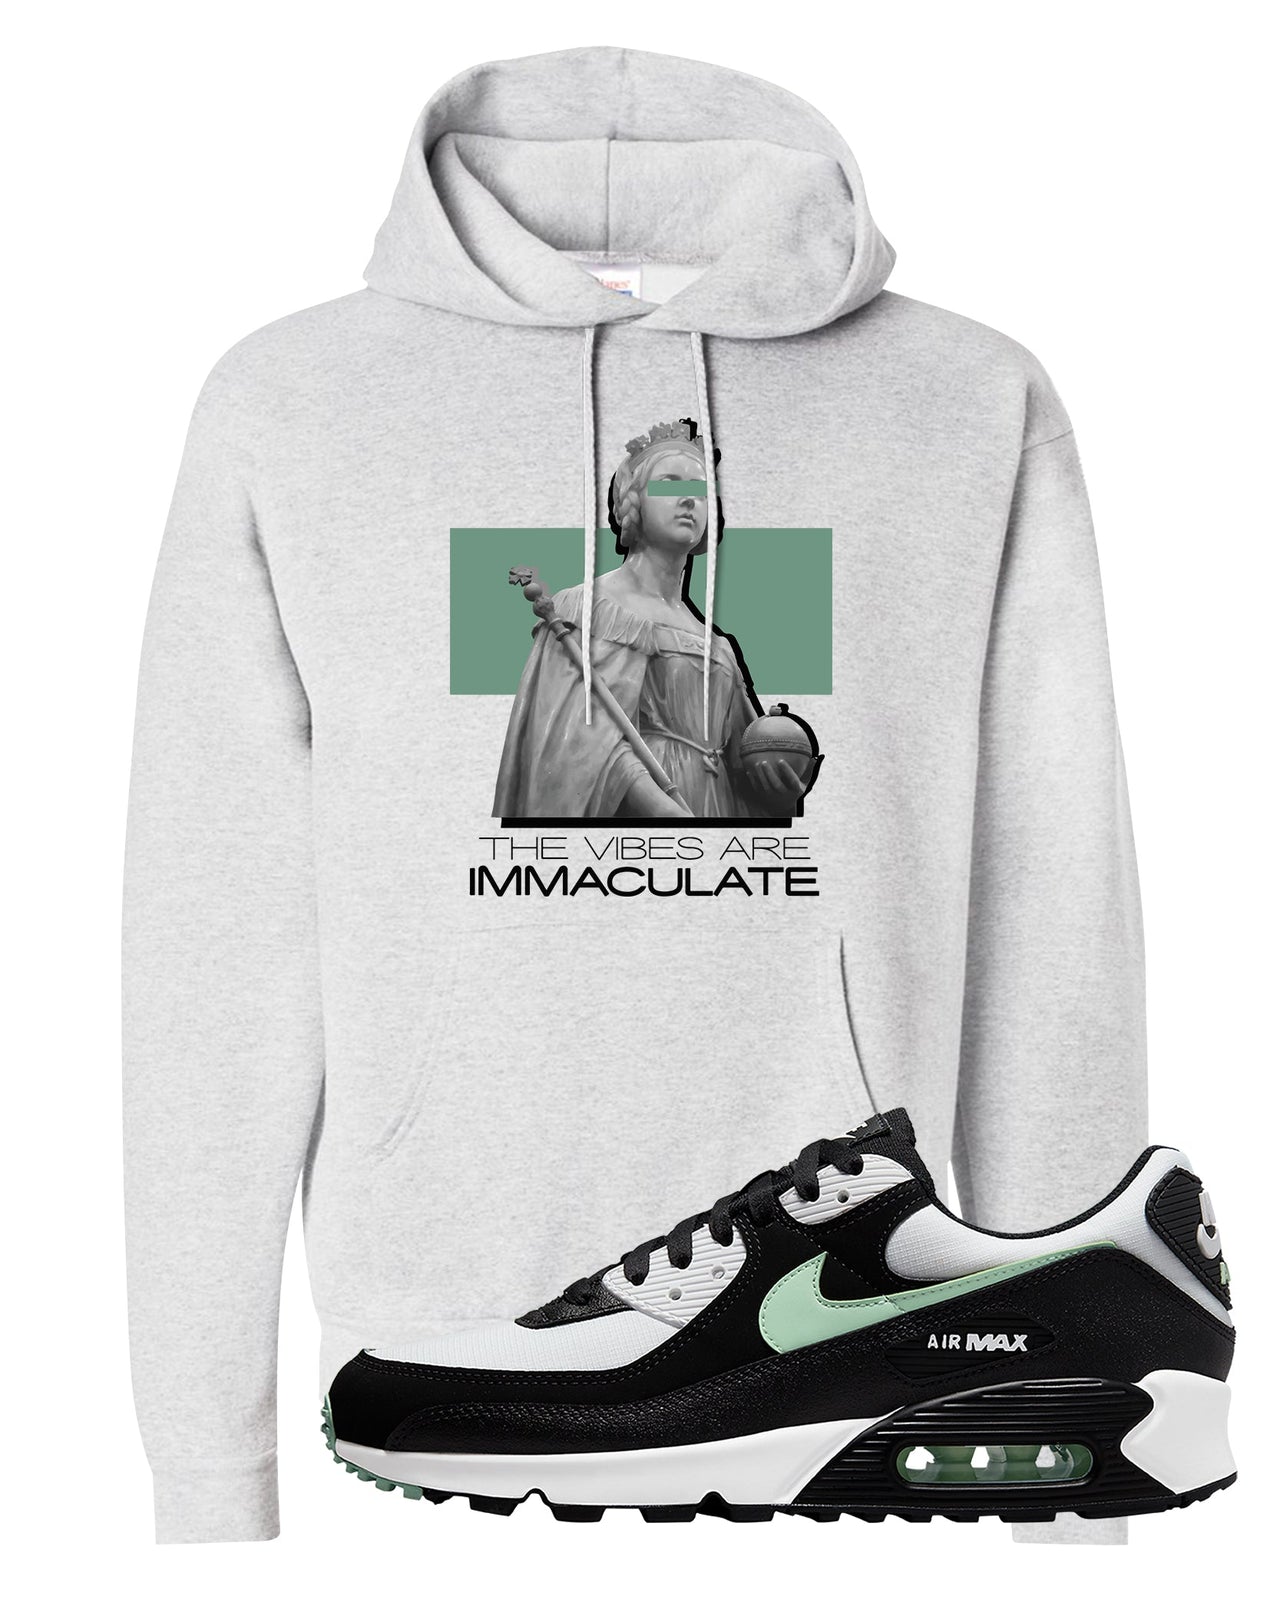 Black Mint 90s Hoodie | The Vibes Are Immaculate, Ash